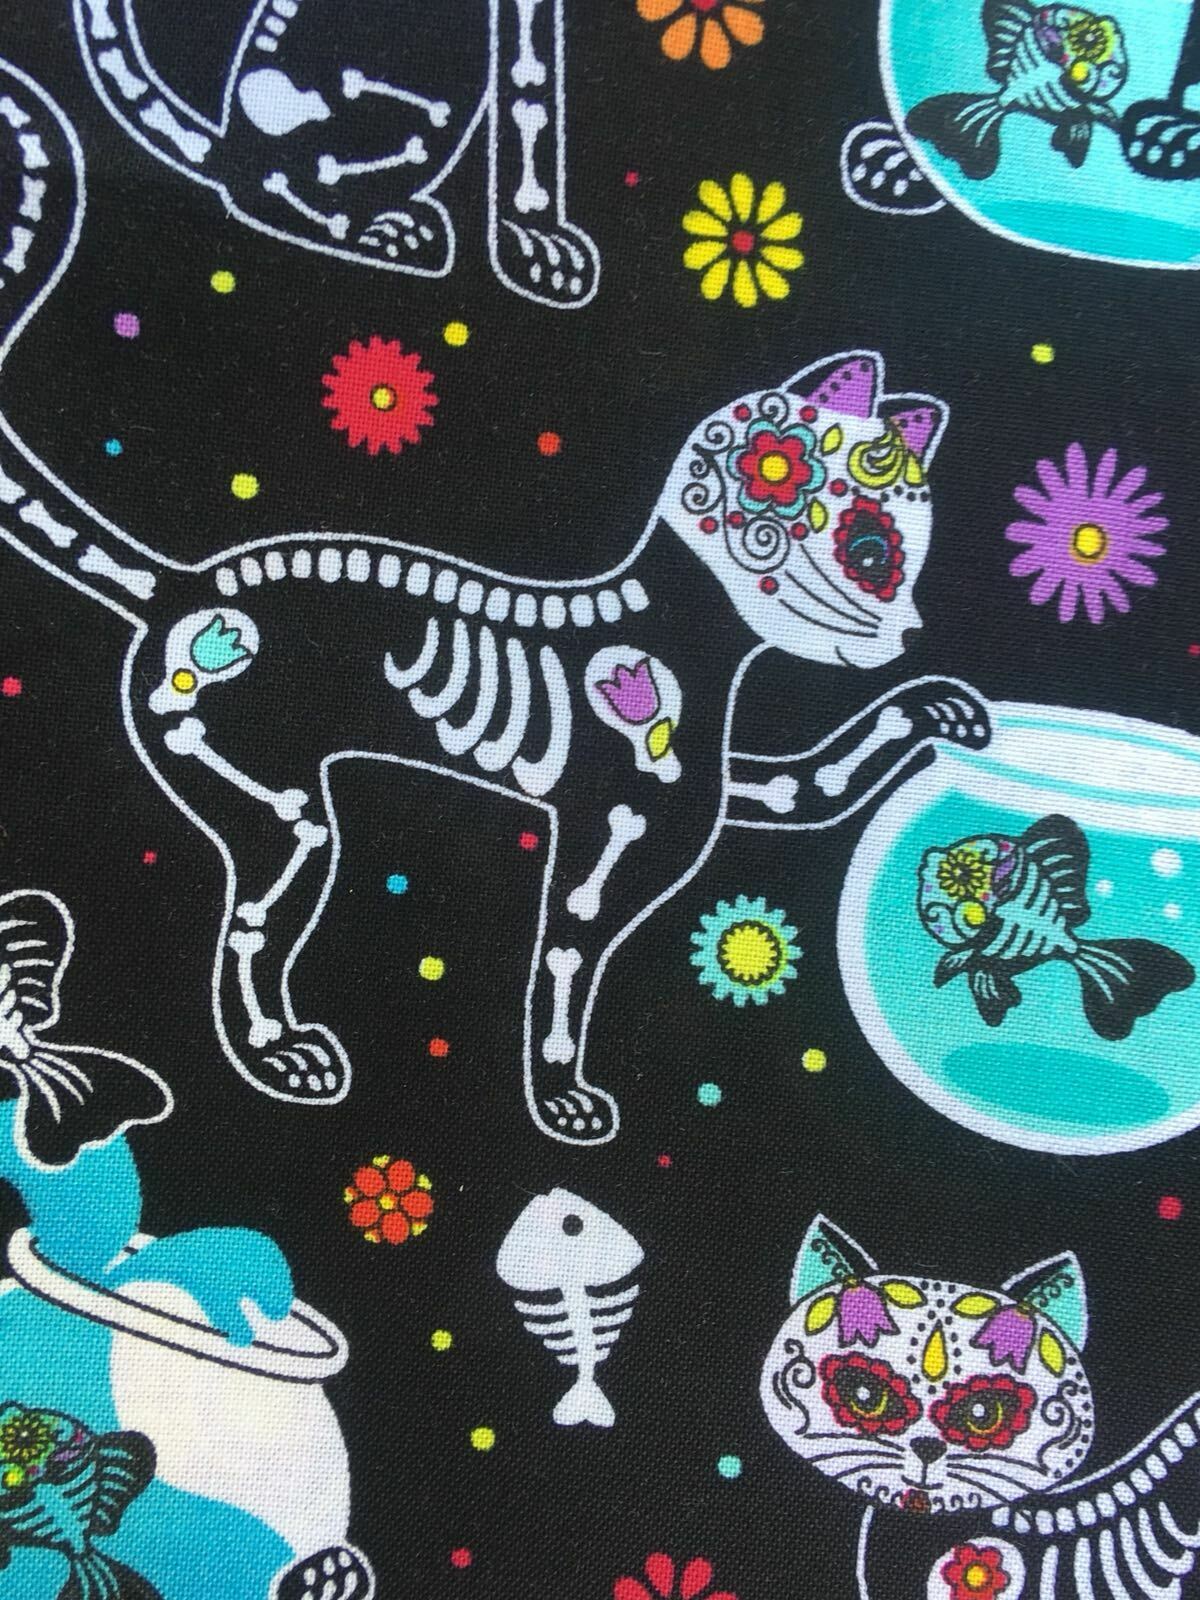 Day of the Dead Skeleton Cats - Timeless Treasures - 100% Cotton Fabric